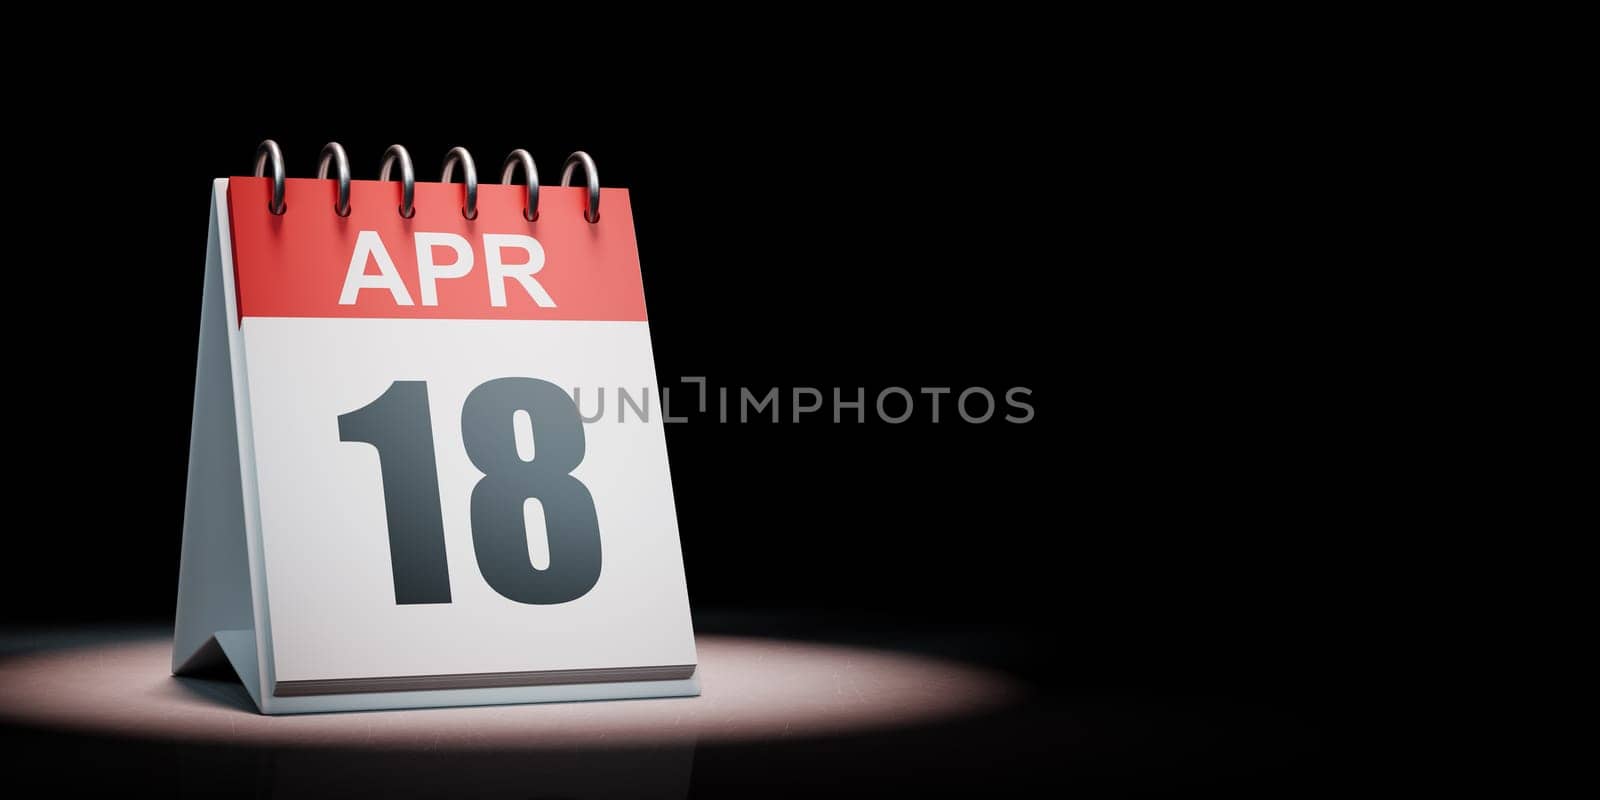 Red and White April 18 Desk Calendar Spotlighted on Black Background with Copy Space 3D Illustration